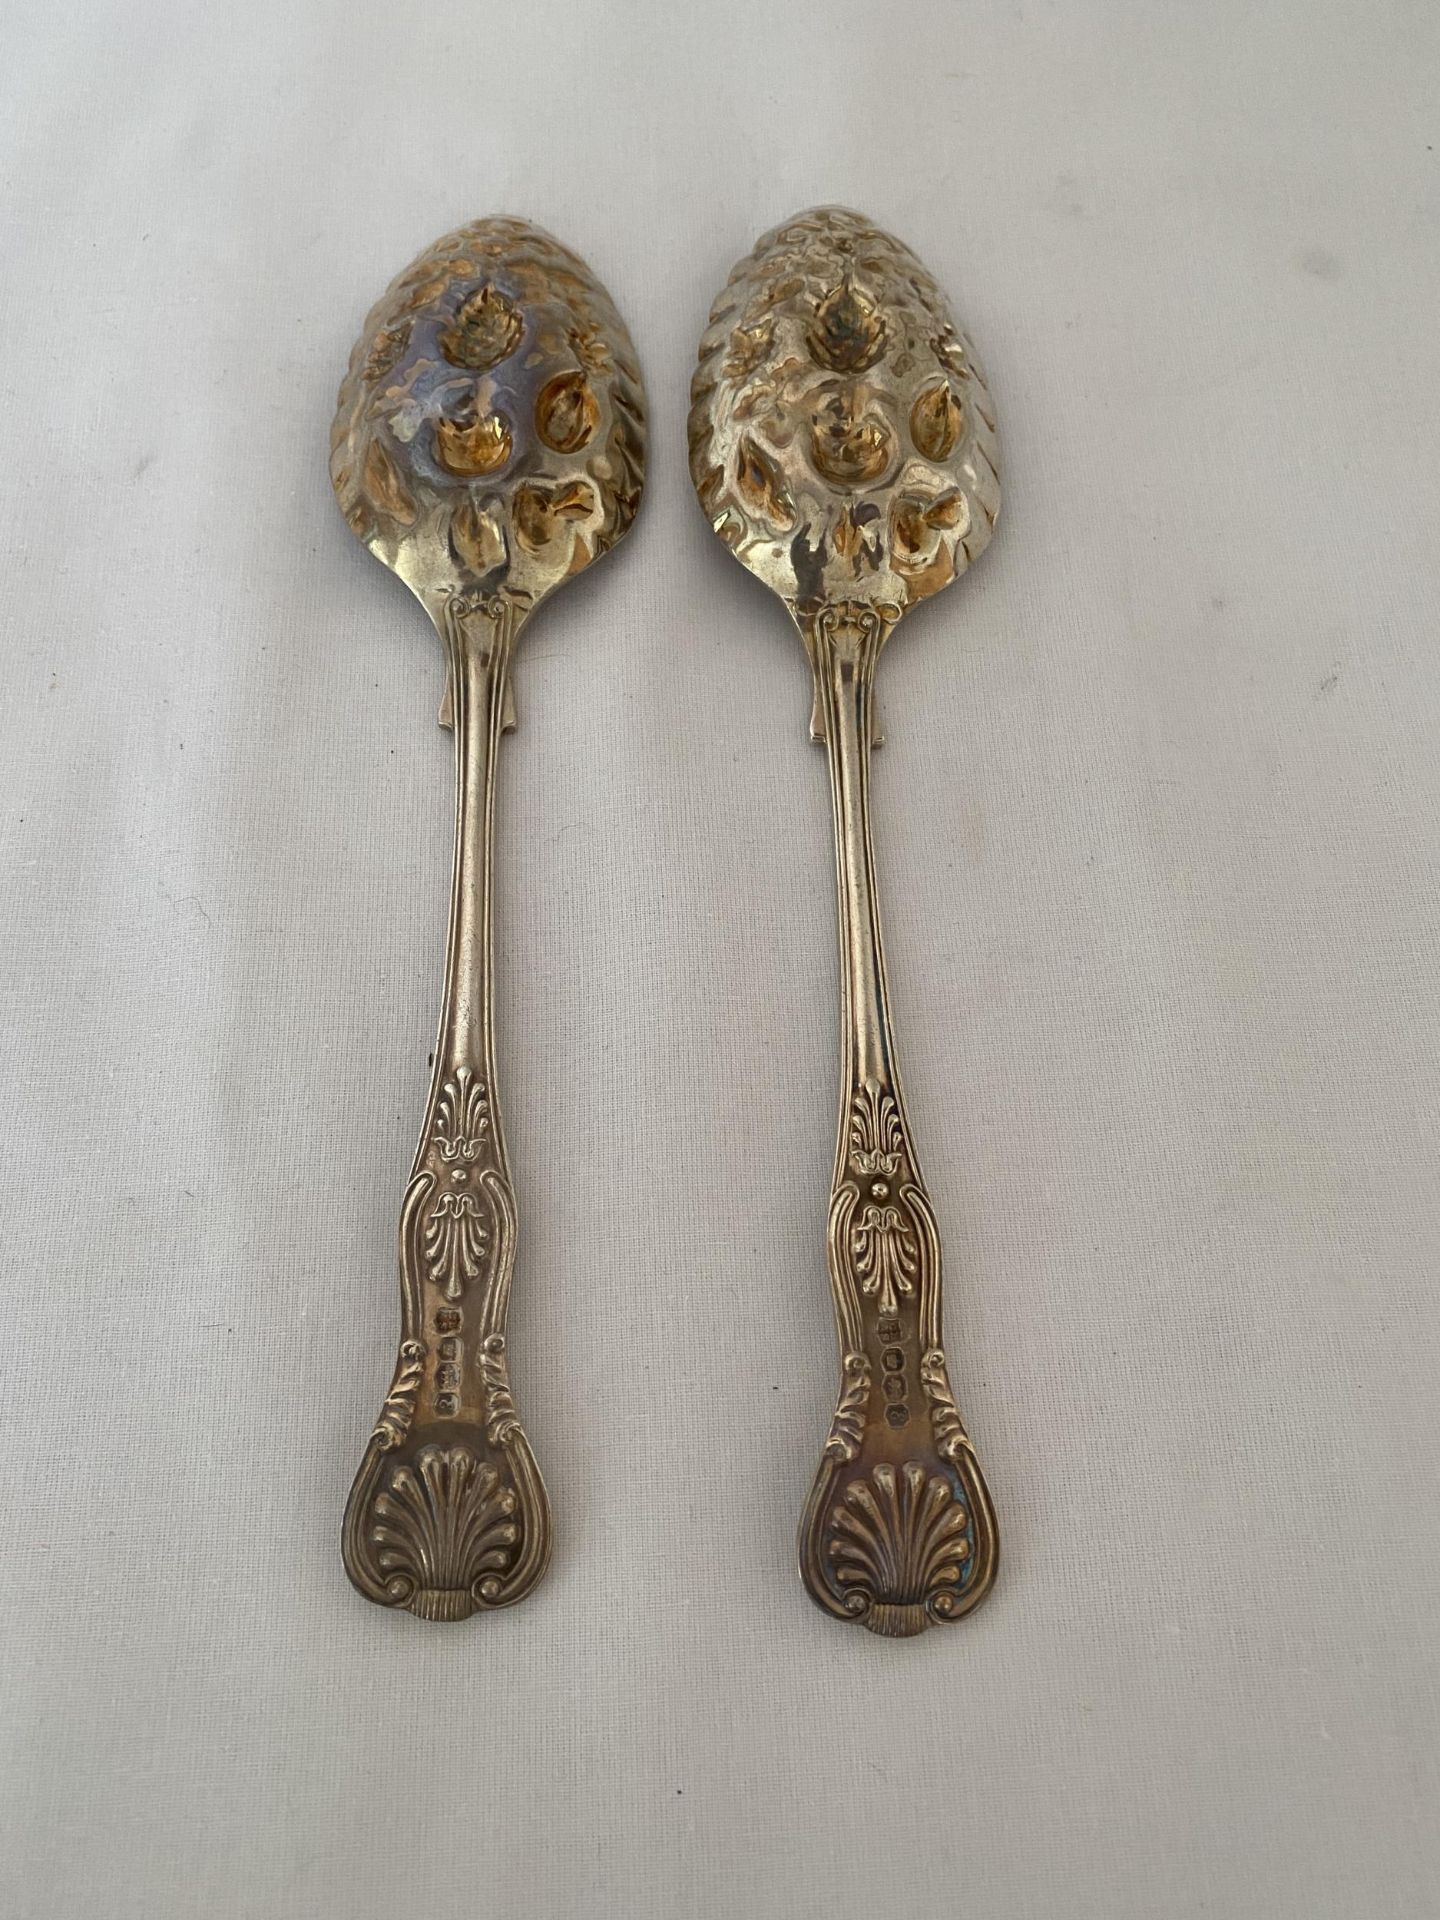 A PAIR OF ELIZABETH II 1972 HALLMARKED SHEFFIELD SILVER BERRY SPOONS, MAKER COOPER BROTHERS & SONS - Image 9 of 12